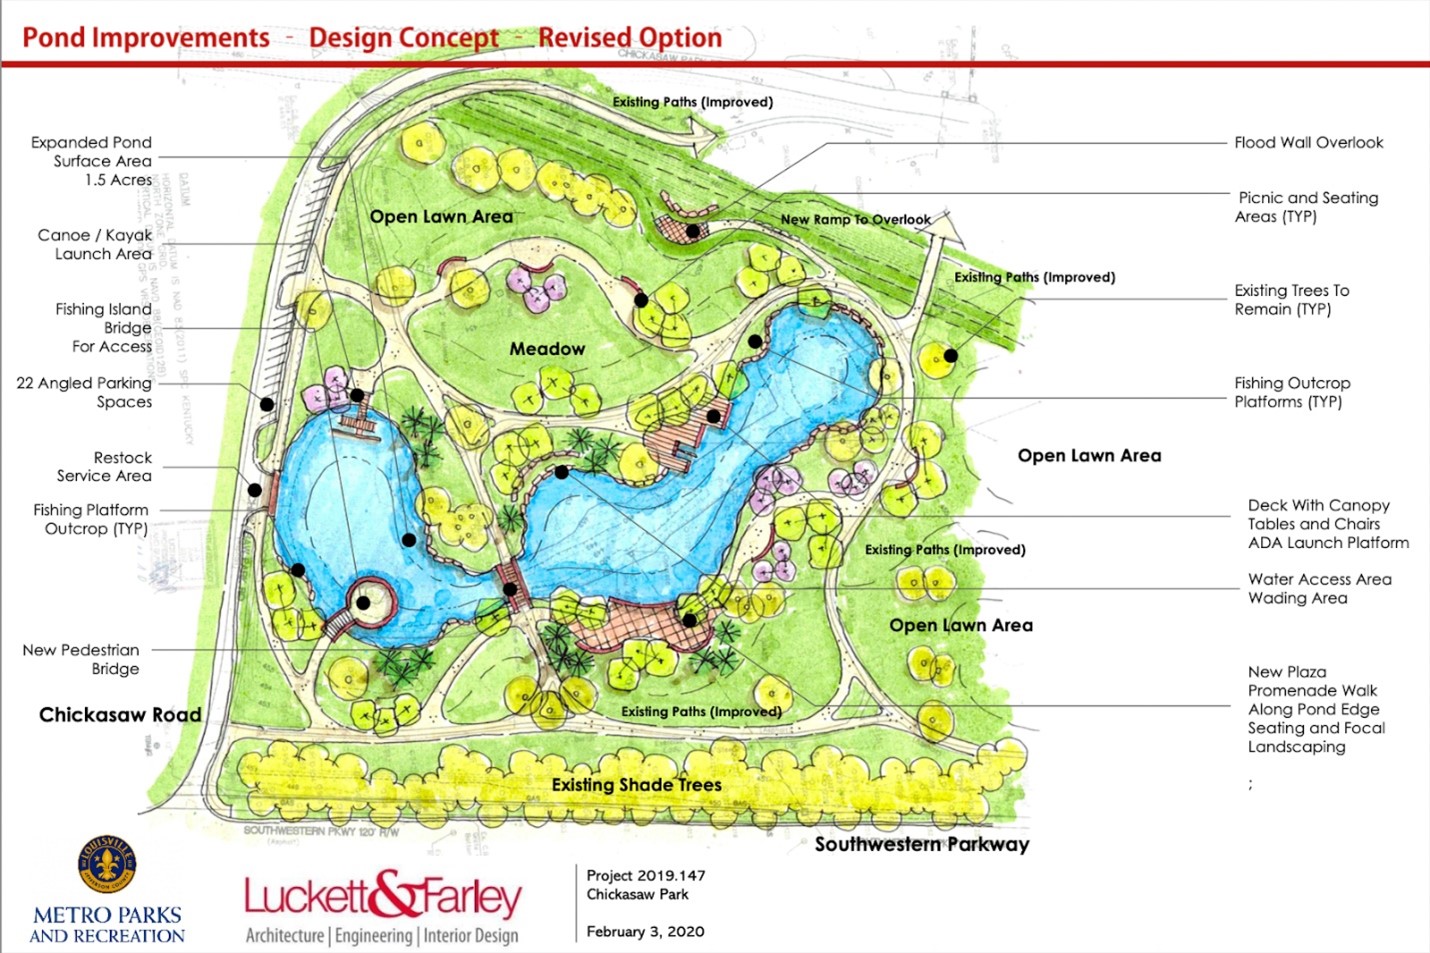 Design concept of the Chickasaw Park pond improvements